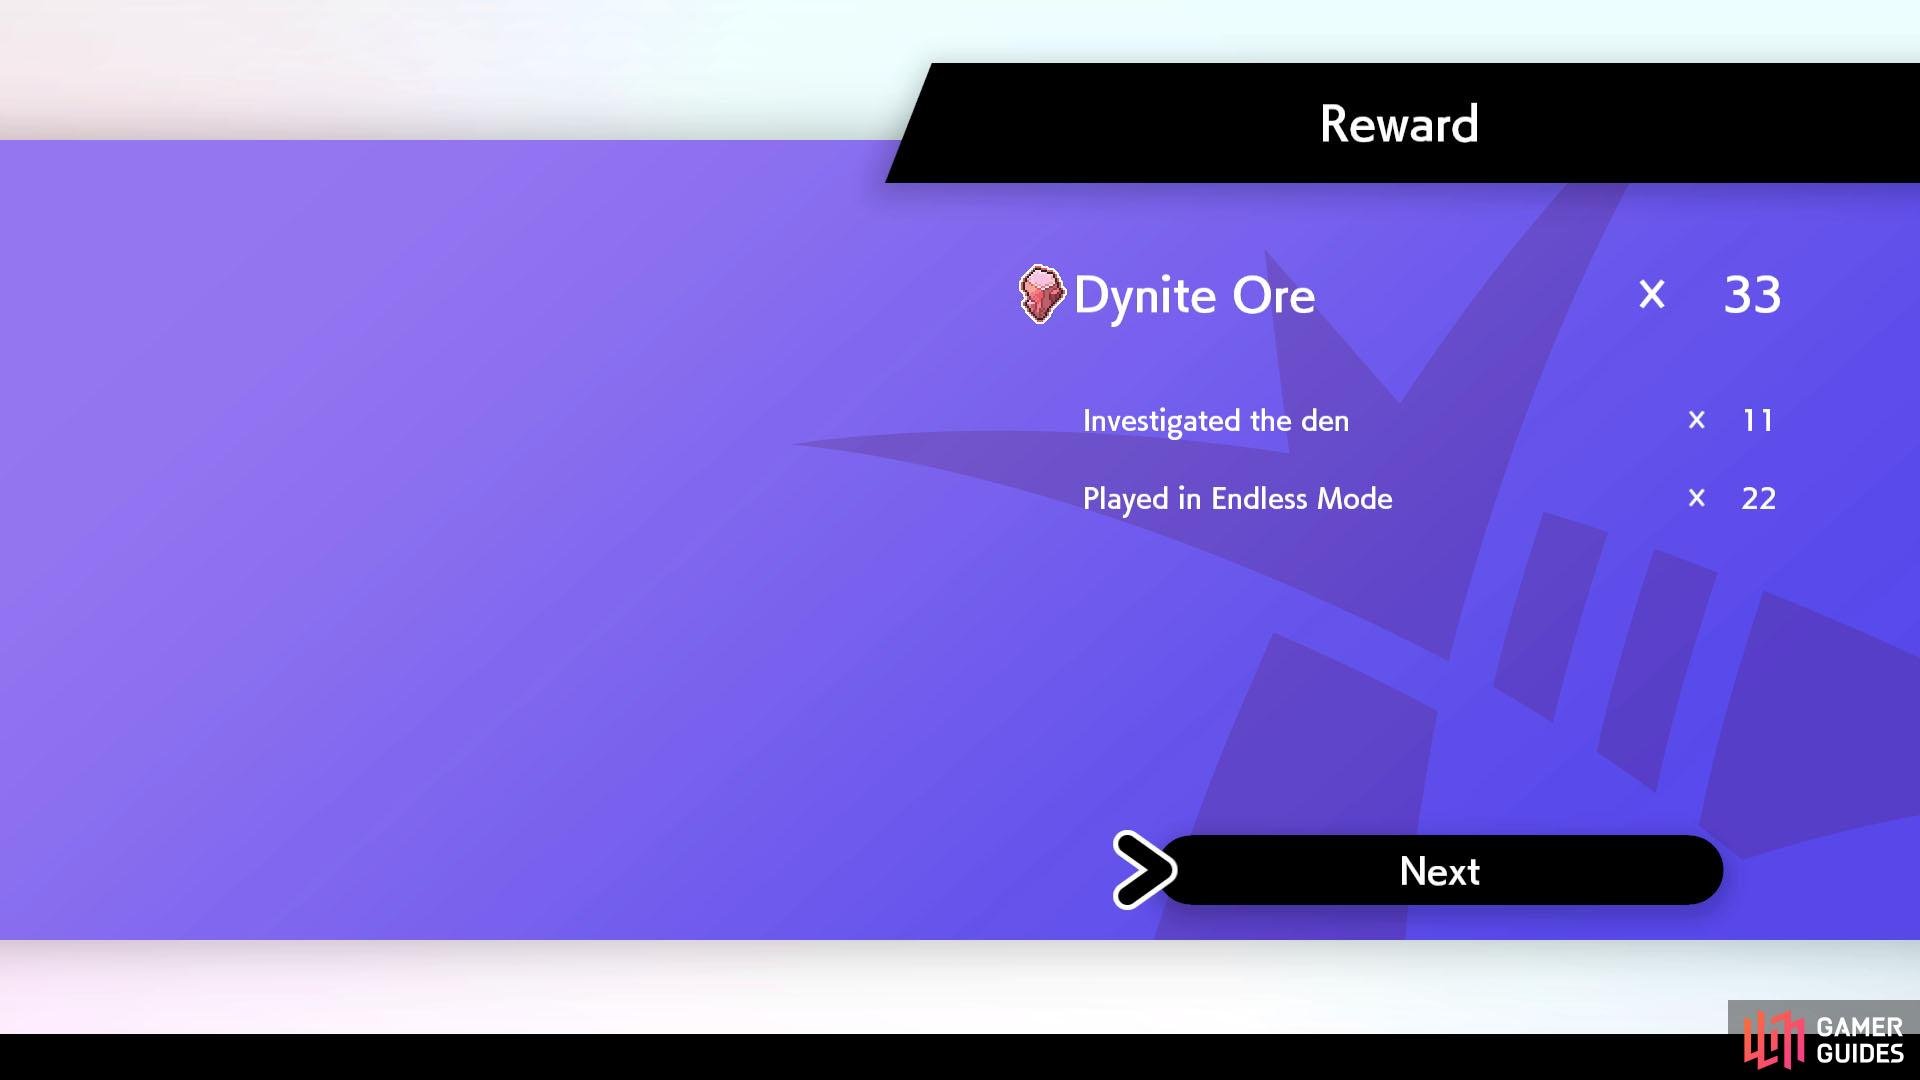 If you play well (and are really lucky), you can scoop up a lot of Dynite Ore.